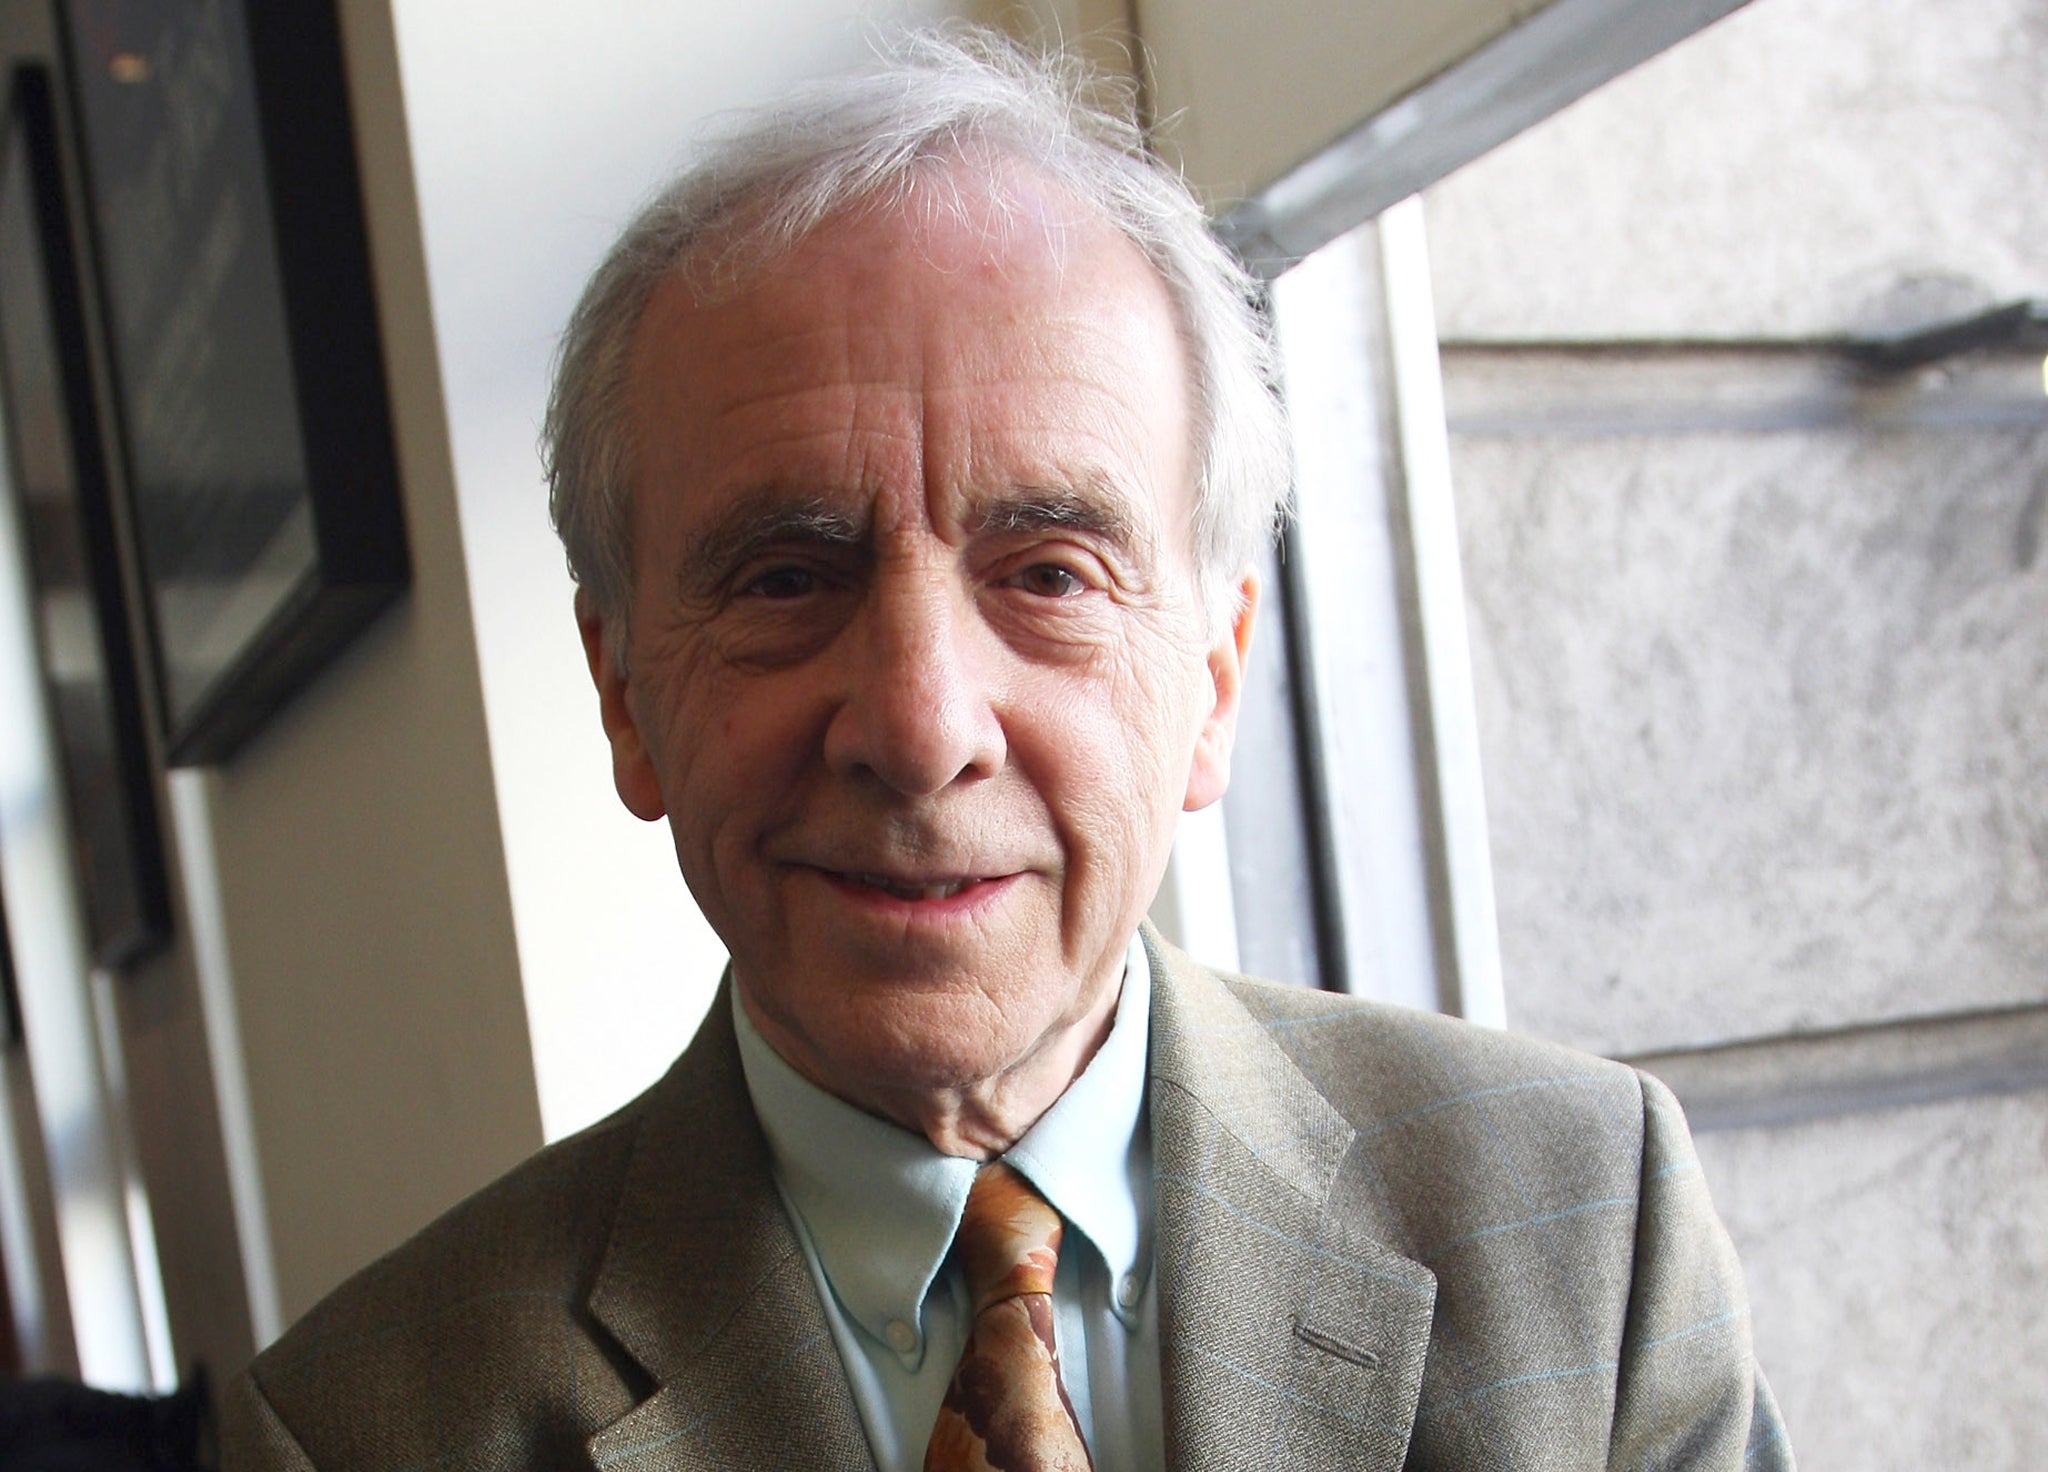 Fawlty Towers actor Andrew Sachs, who originally played Manuel in the series